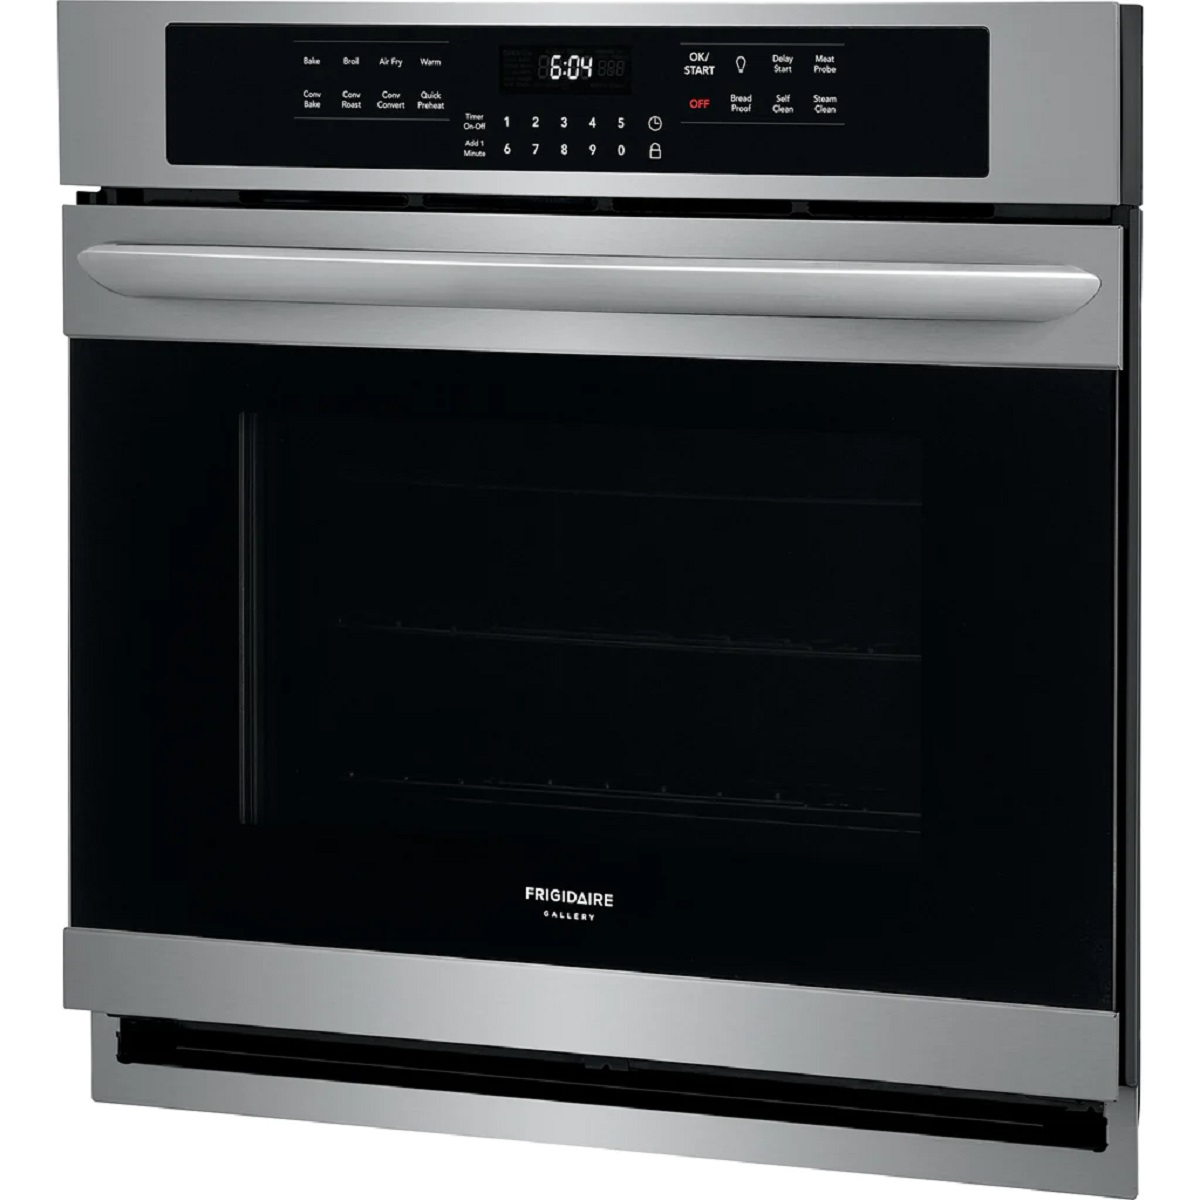 11 Best Frigidaire Built-In Wall Ovens for 2023